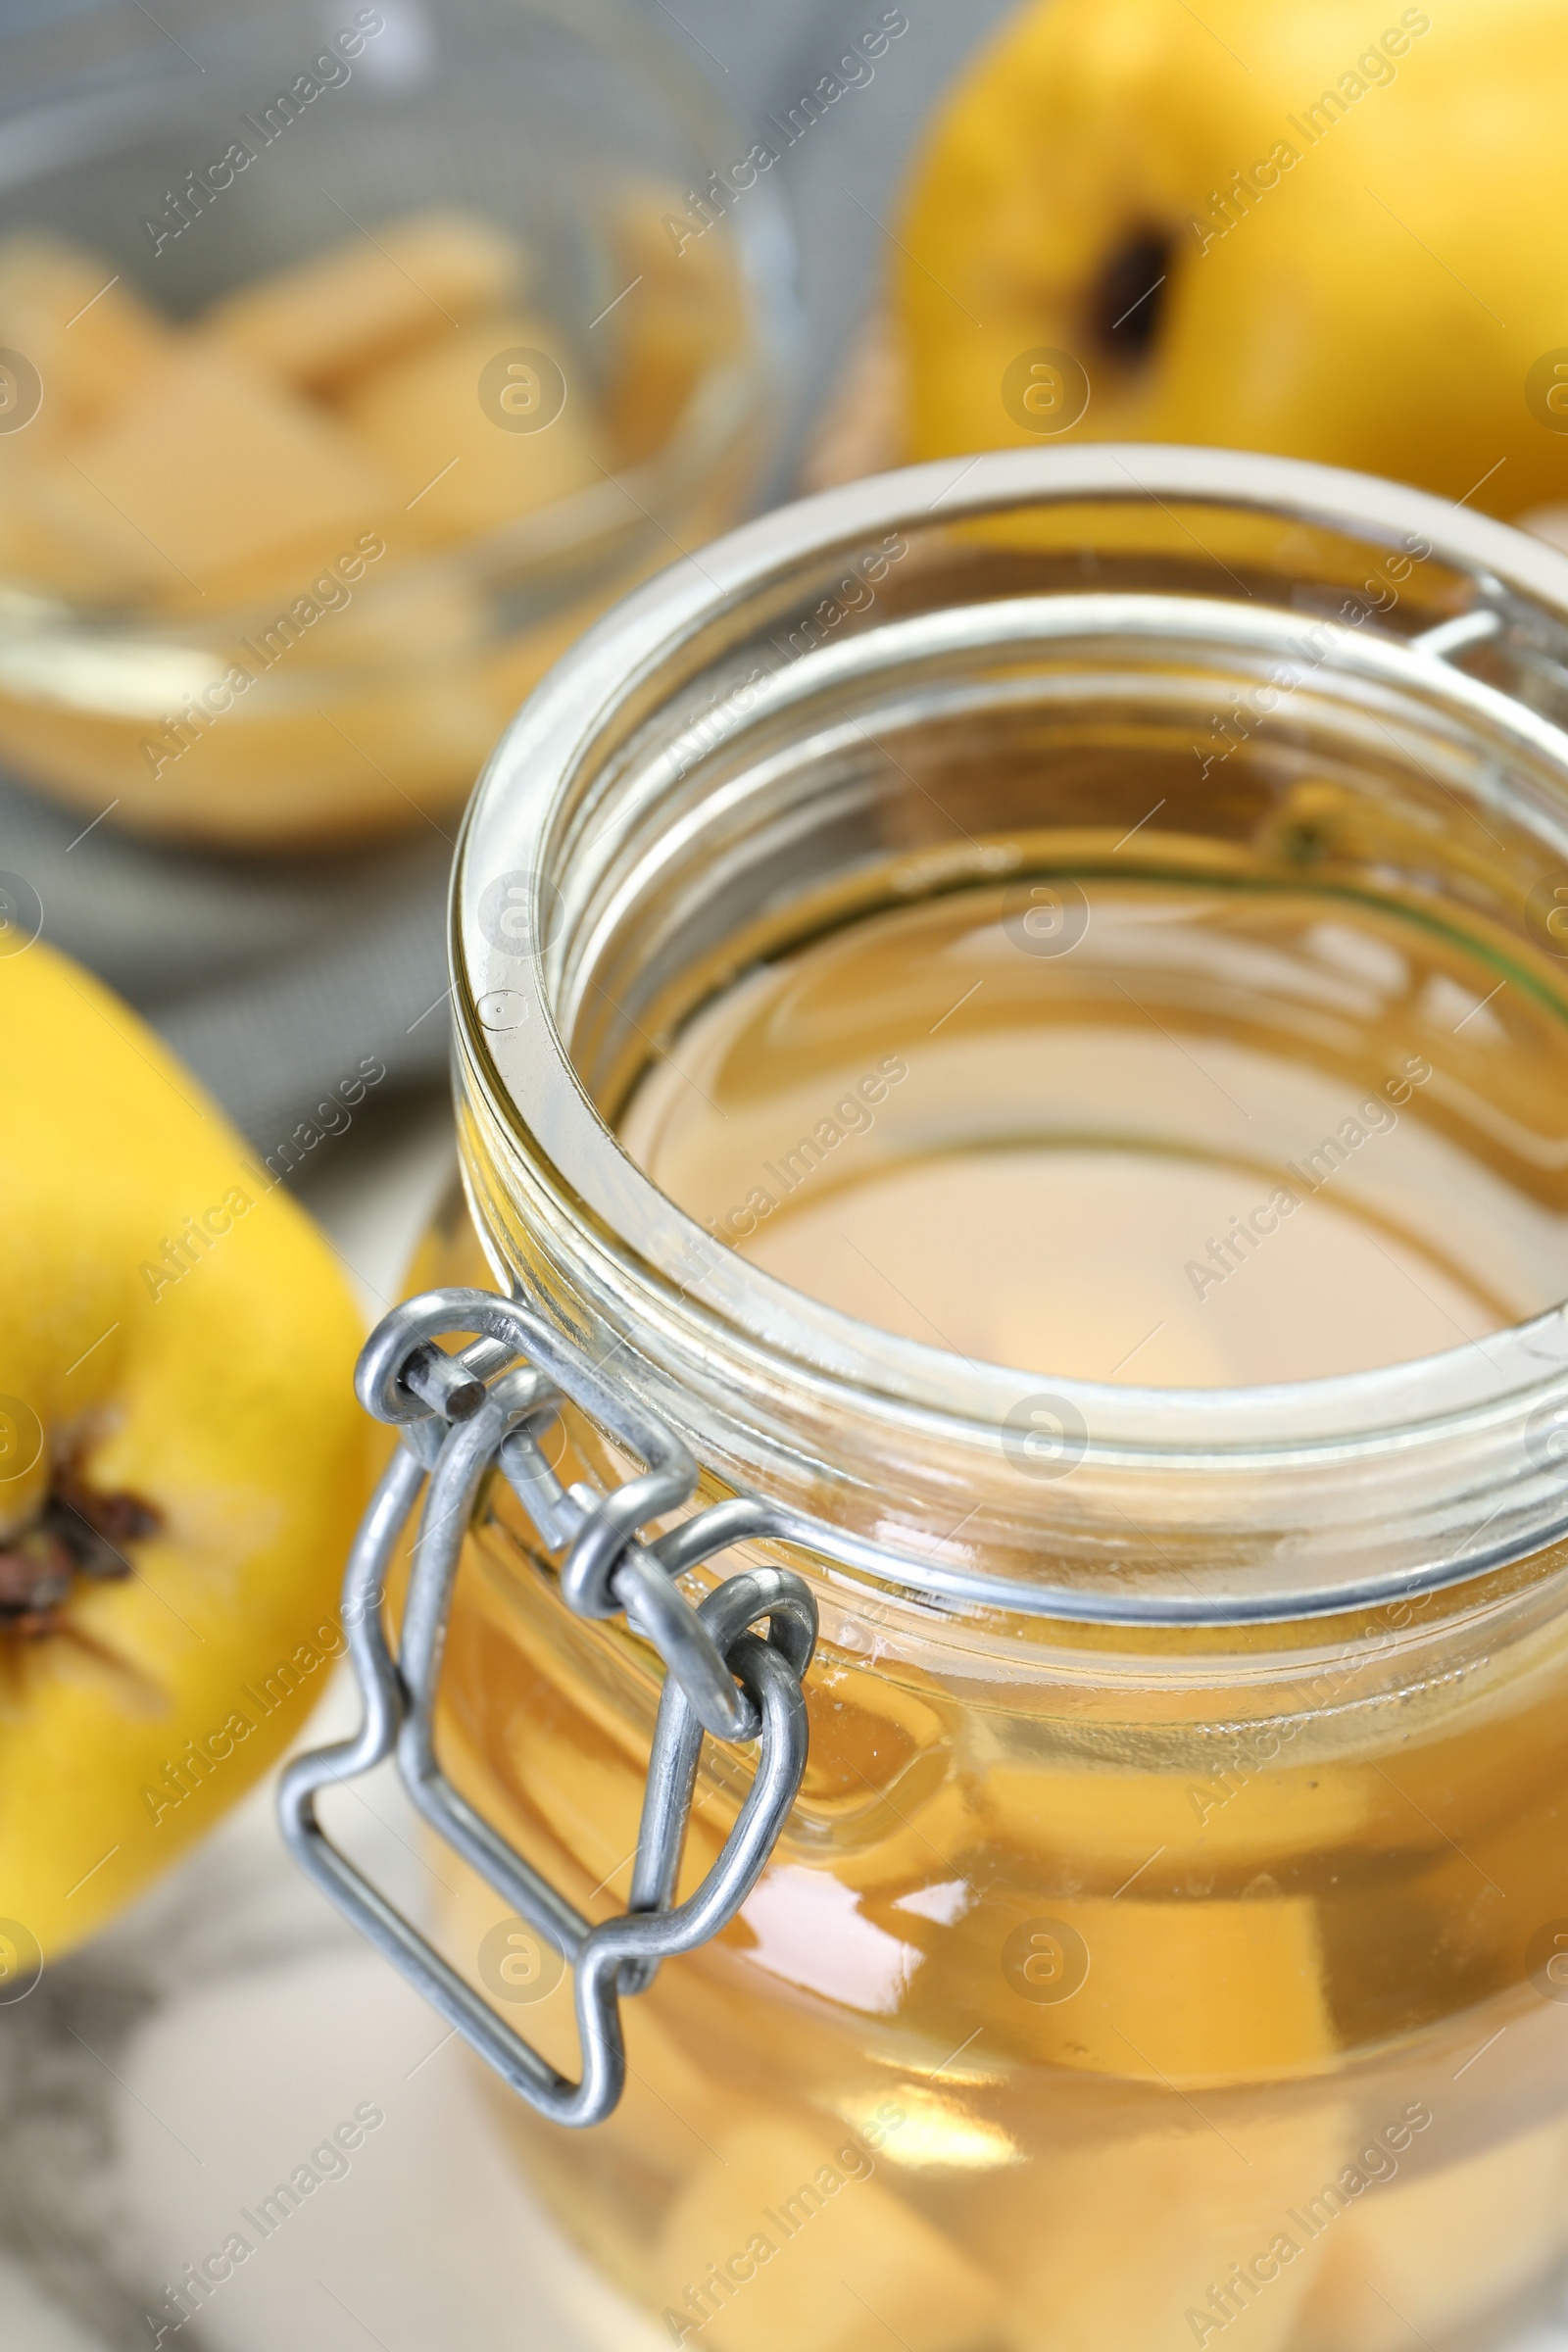 Photo of Delicious quince drink in jar, closeup view